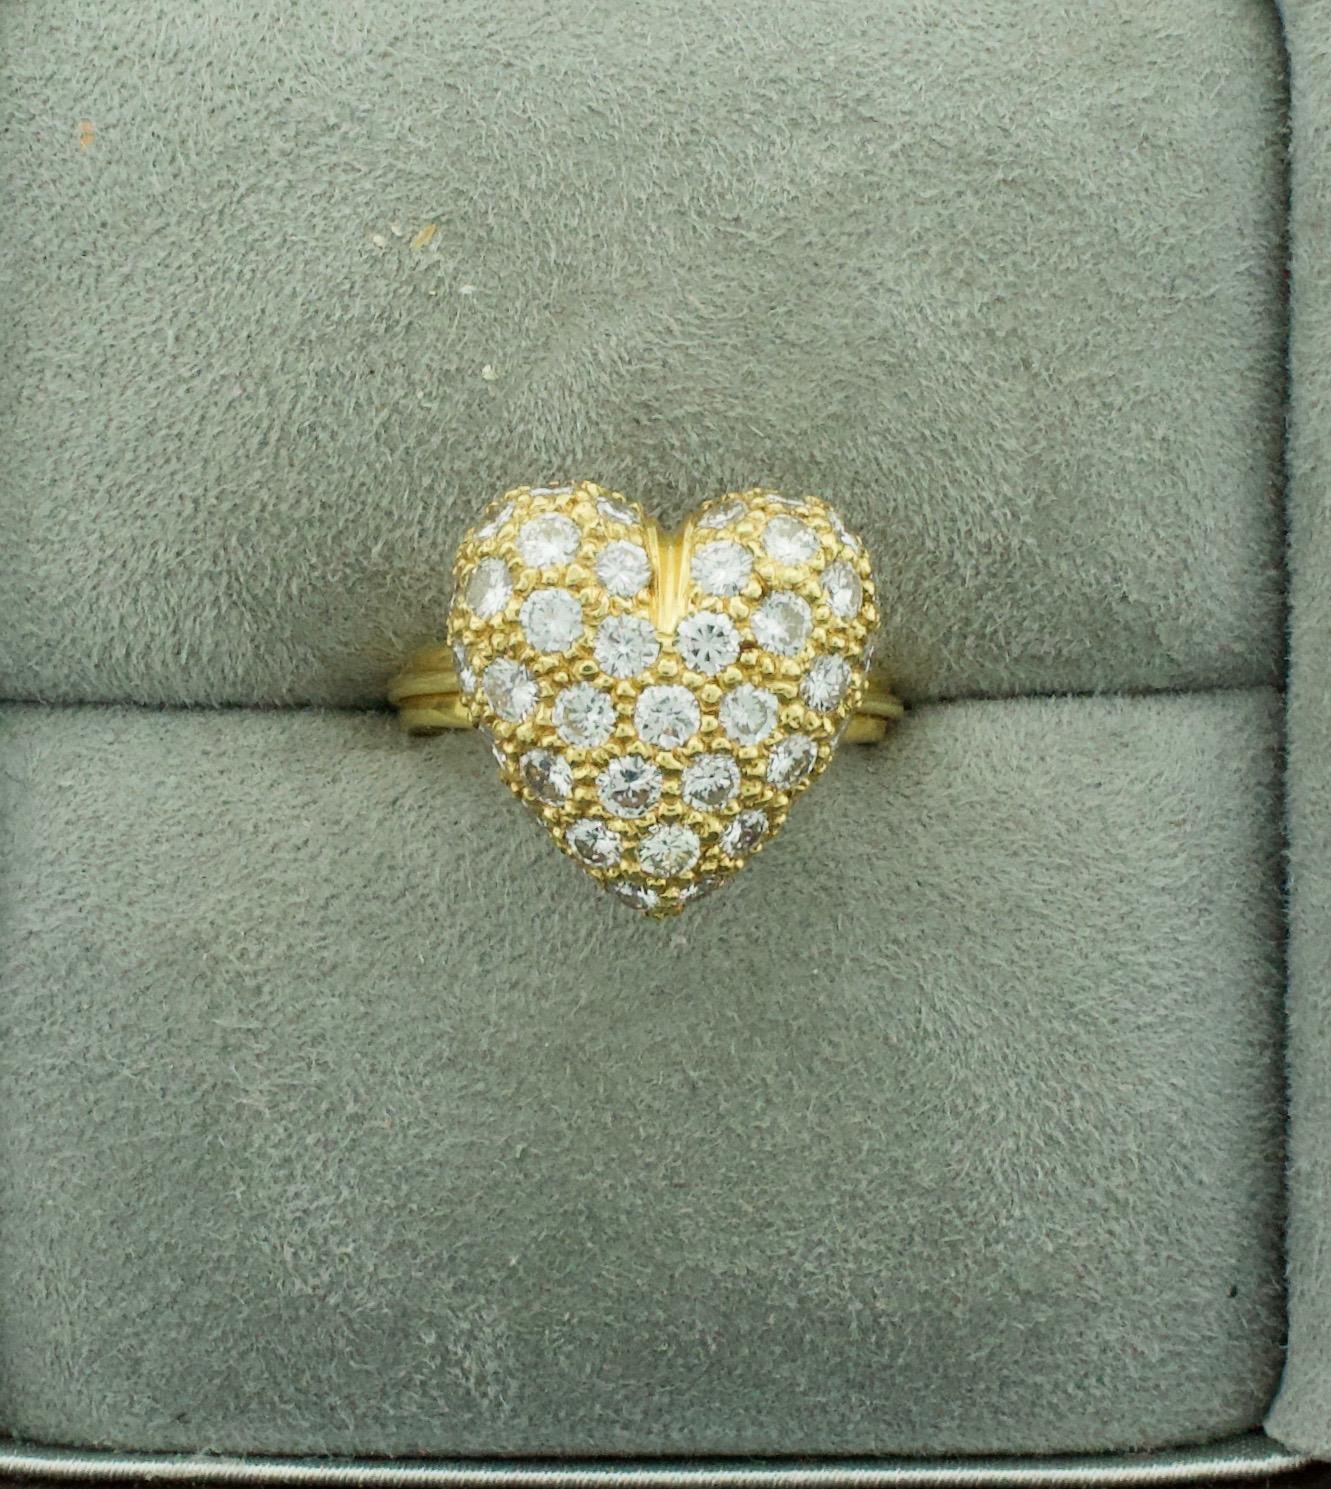 Diamond Pave' Heart Ring in 18k 2.54 carats
Fifty Seven Round Brilliant Cut Diamonds weighing 2.54 carats approximately [GH VVS- VS1]
Currently Size 6.25 Can Be Sized By Us Or Your Qualified Jeweler
